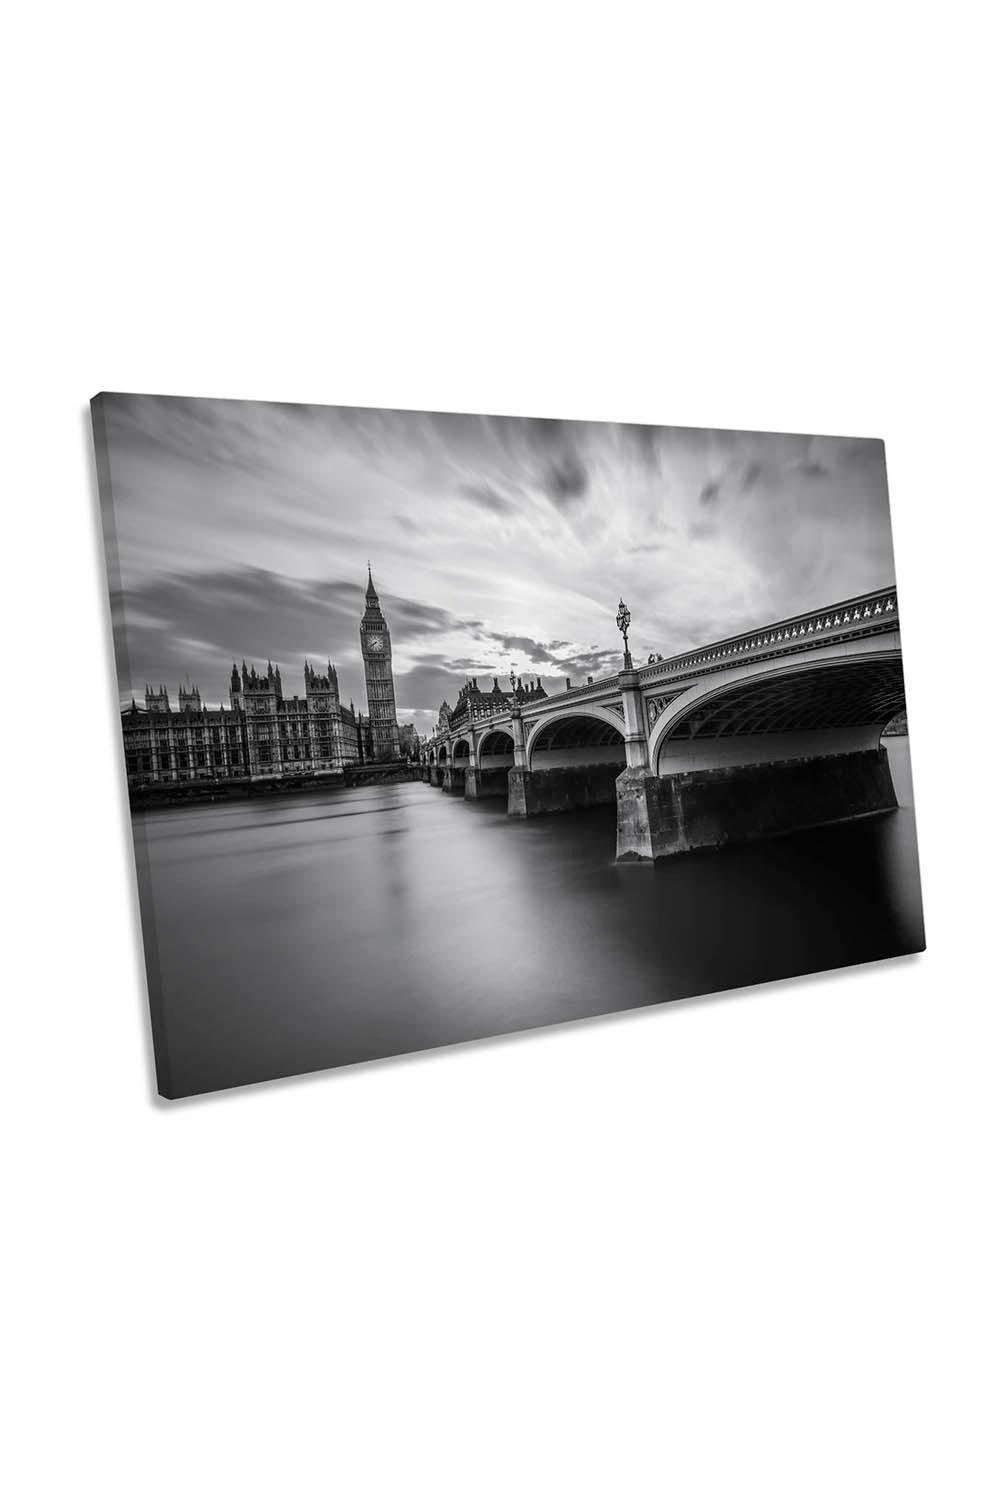 Westminster Serenity London City Canvas Wall Art Picture Print